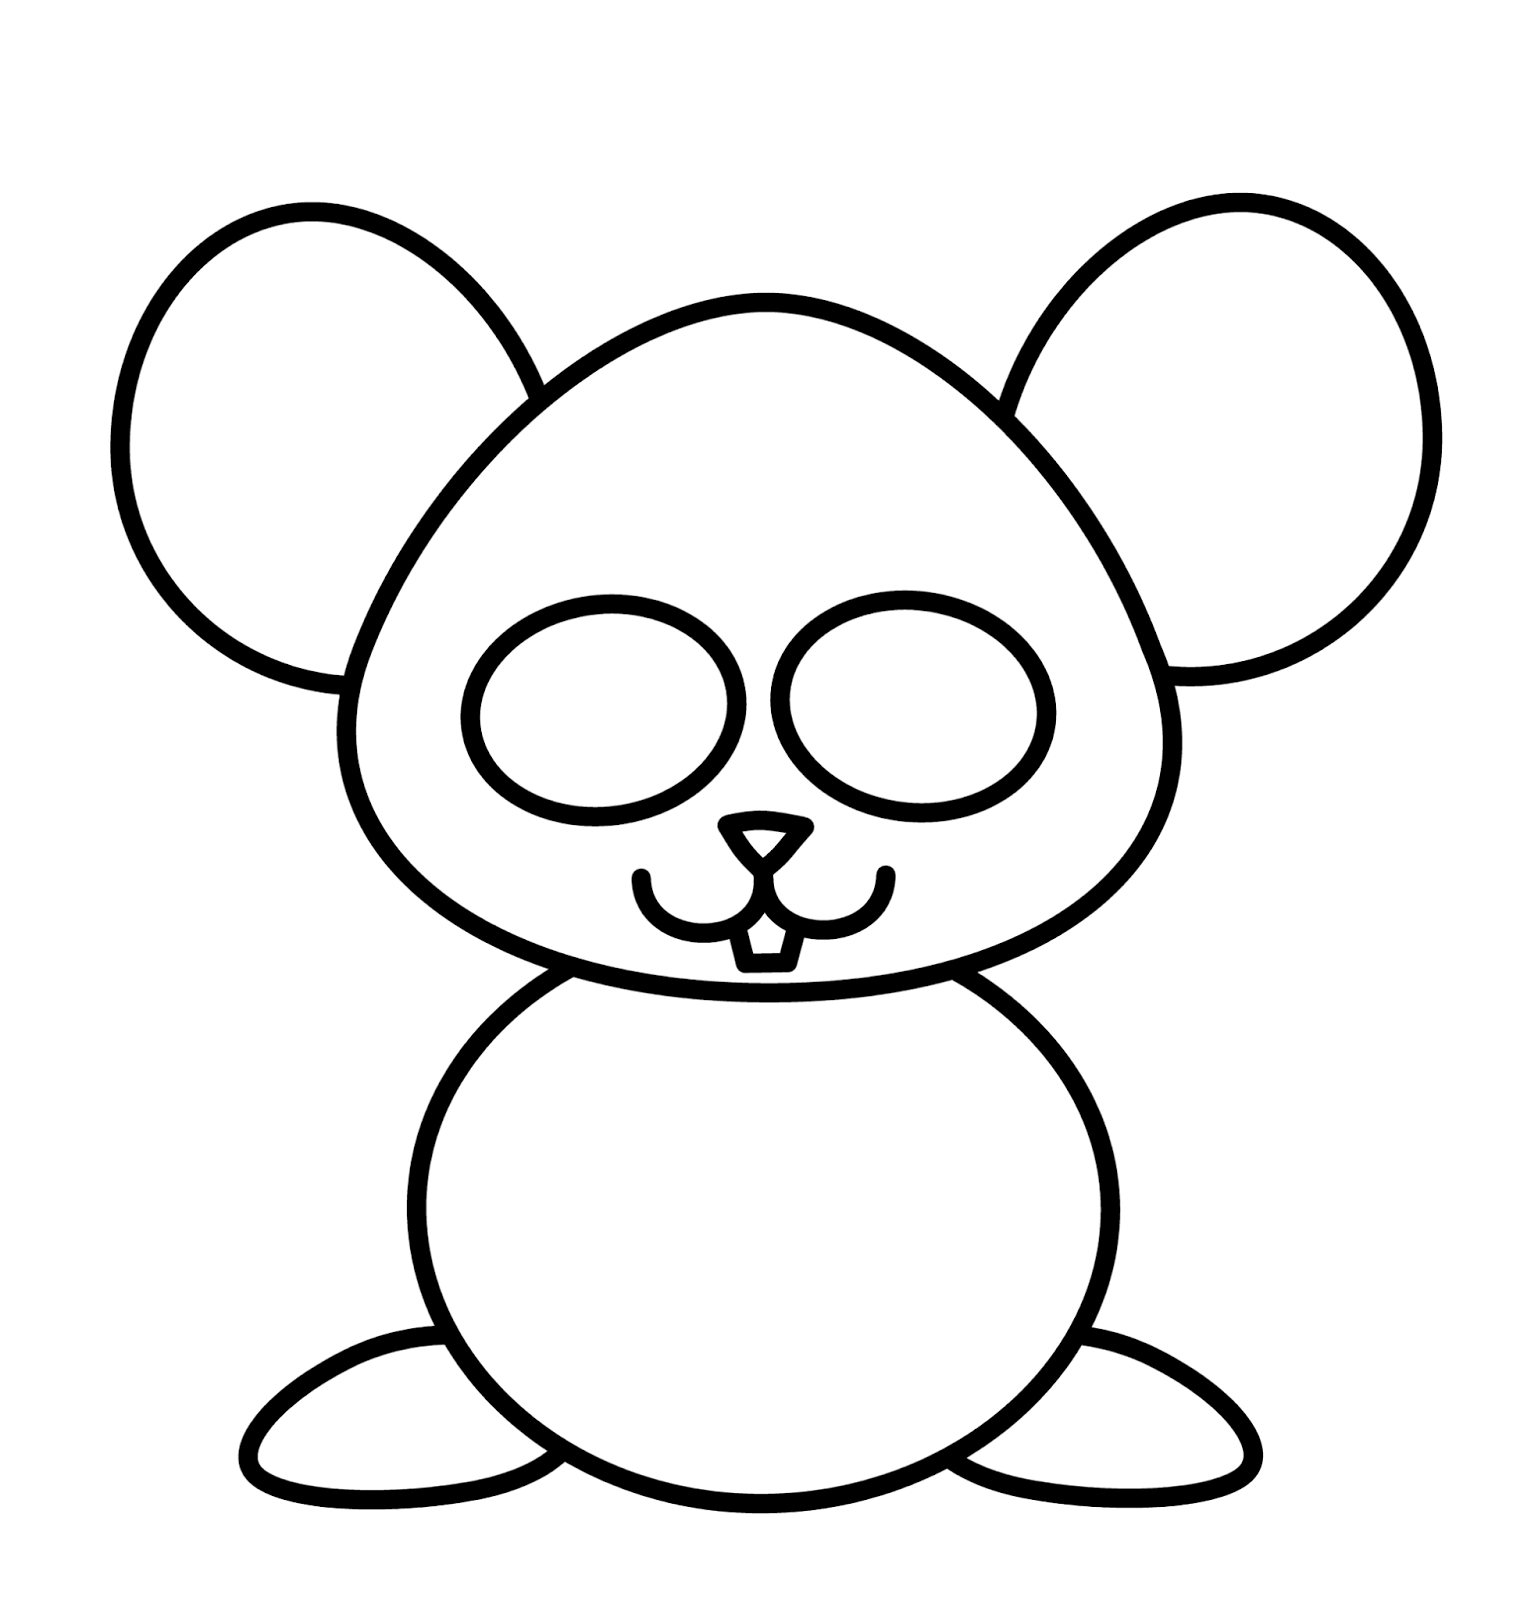 How To Draw Cartoons: Mouse